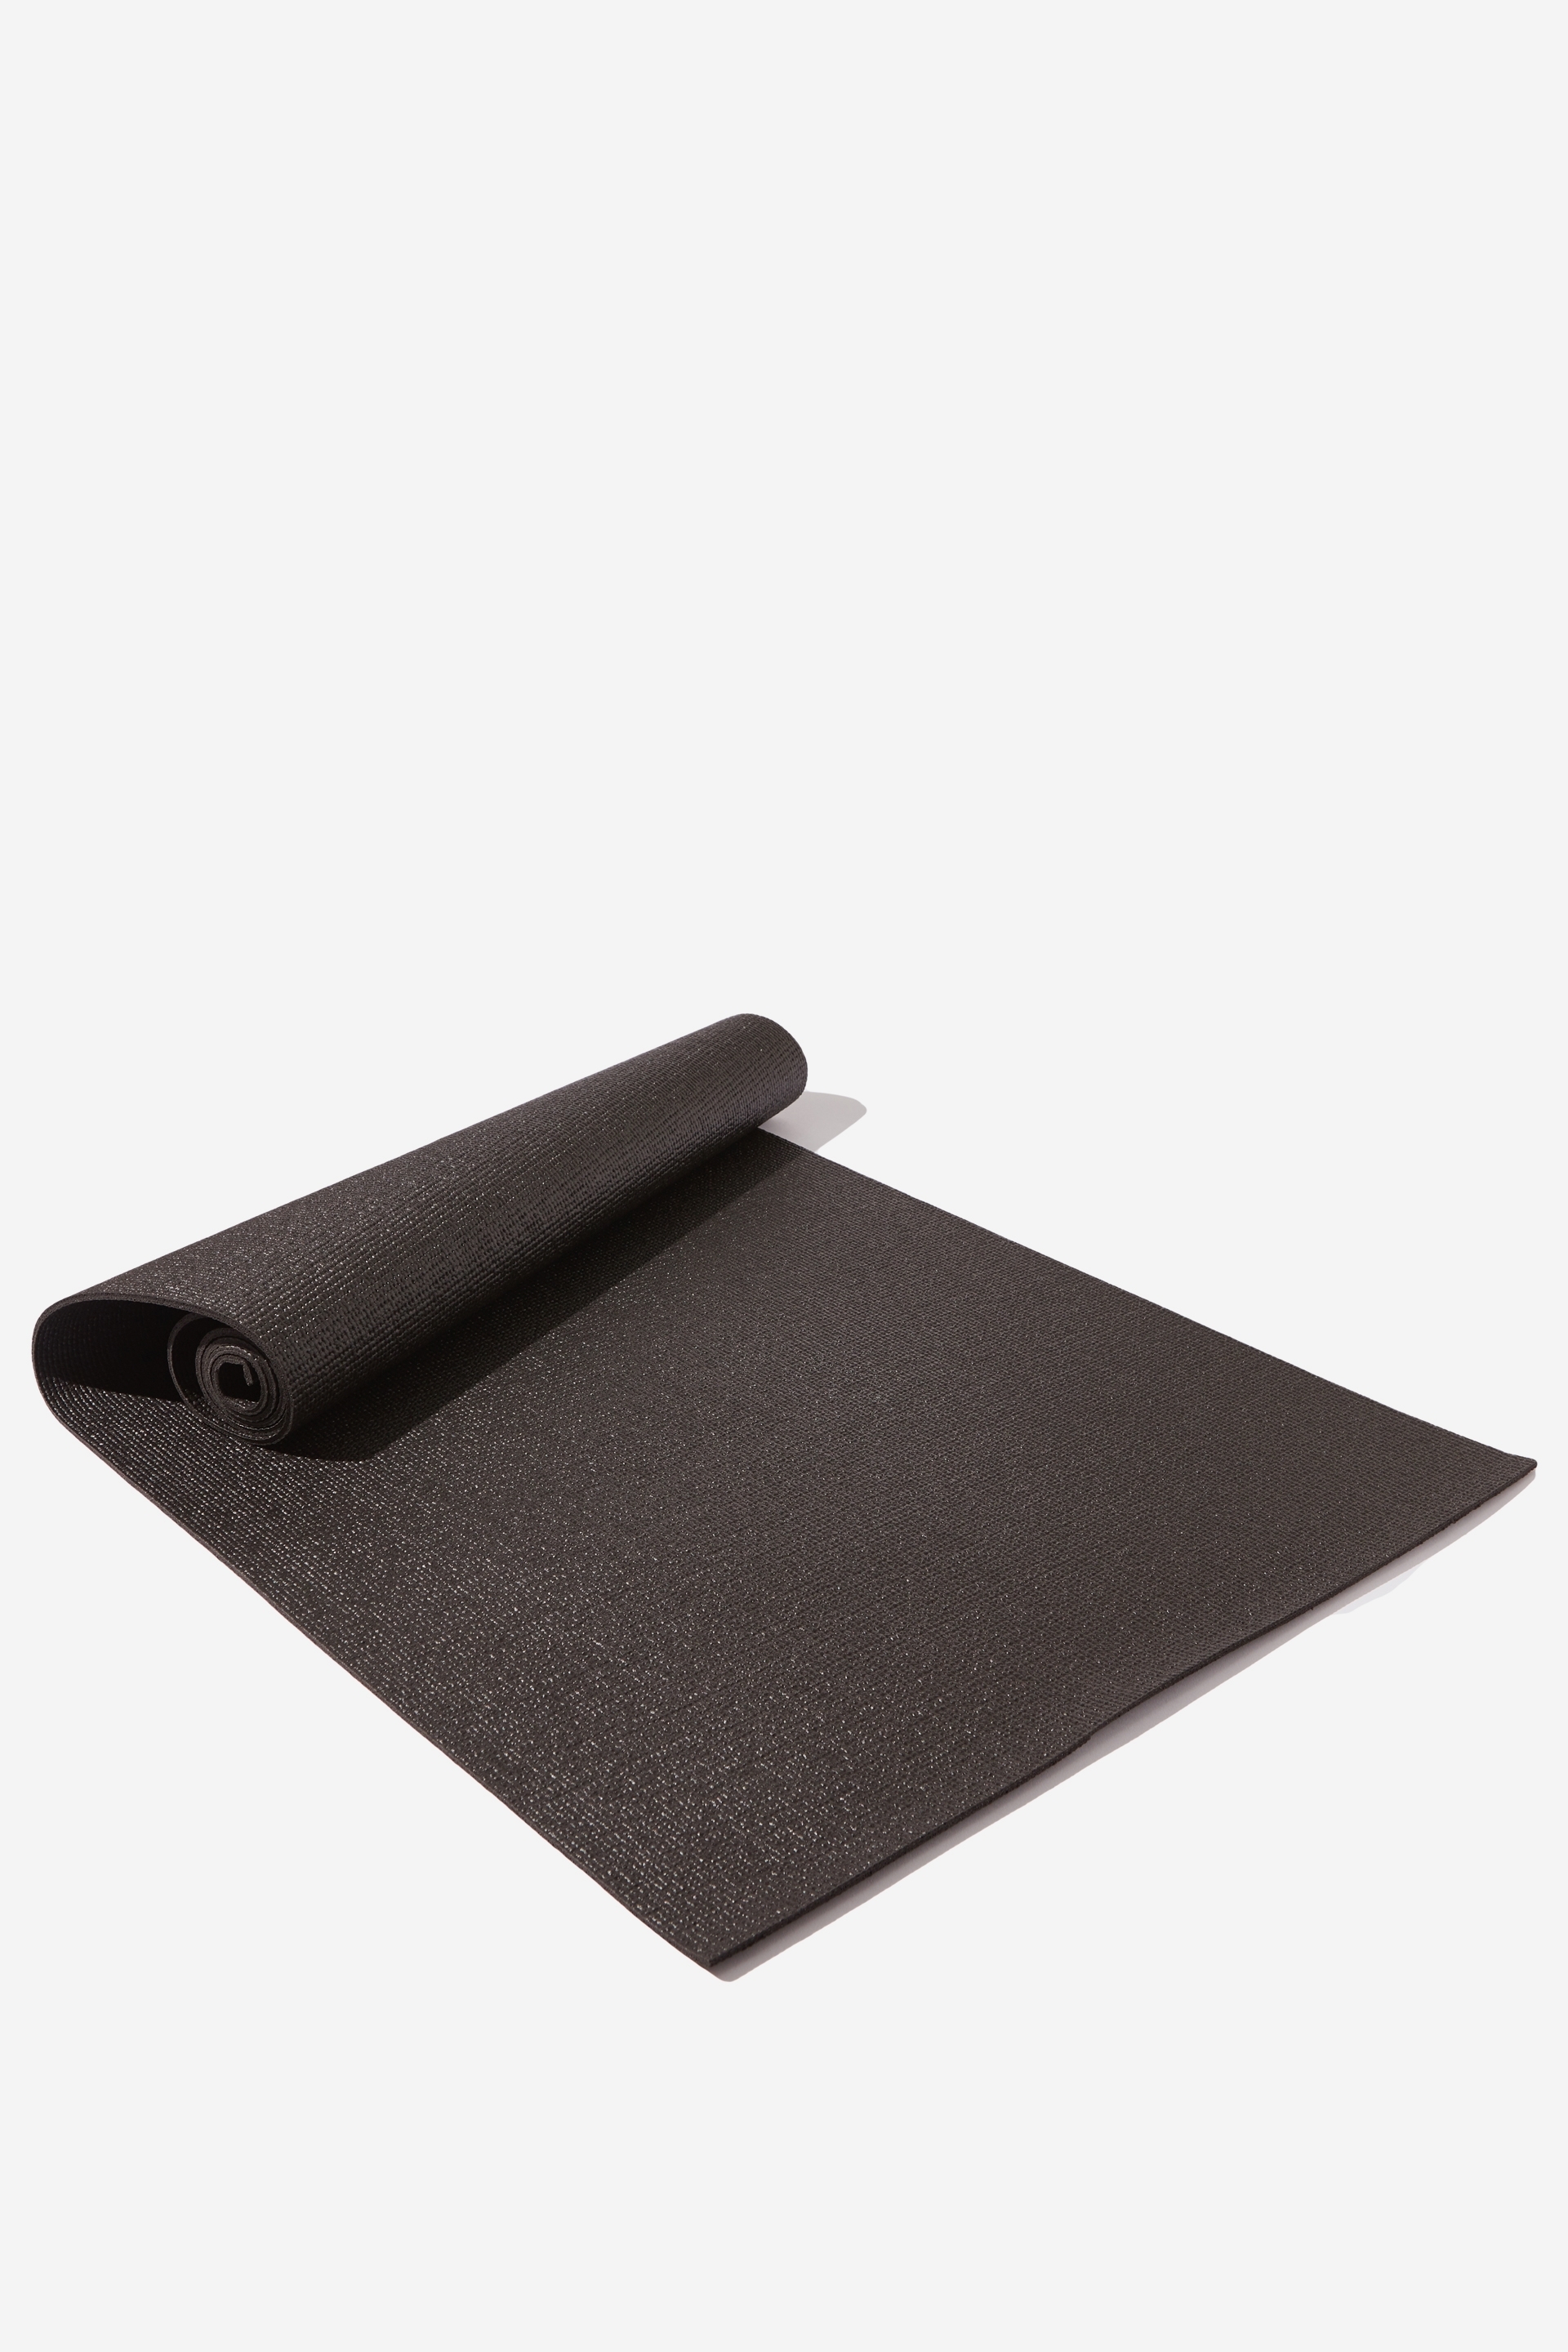 cotton on yoga mat review